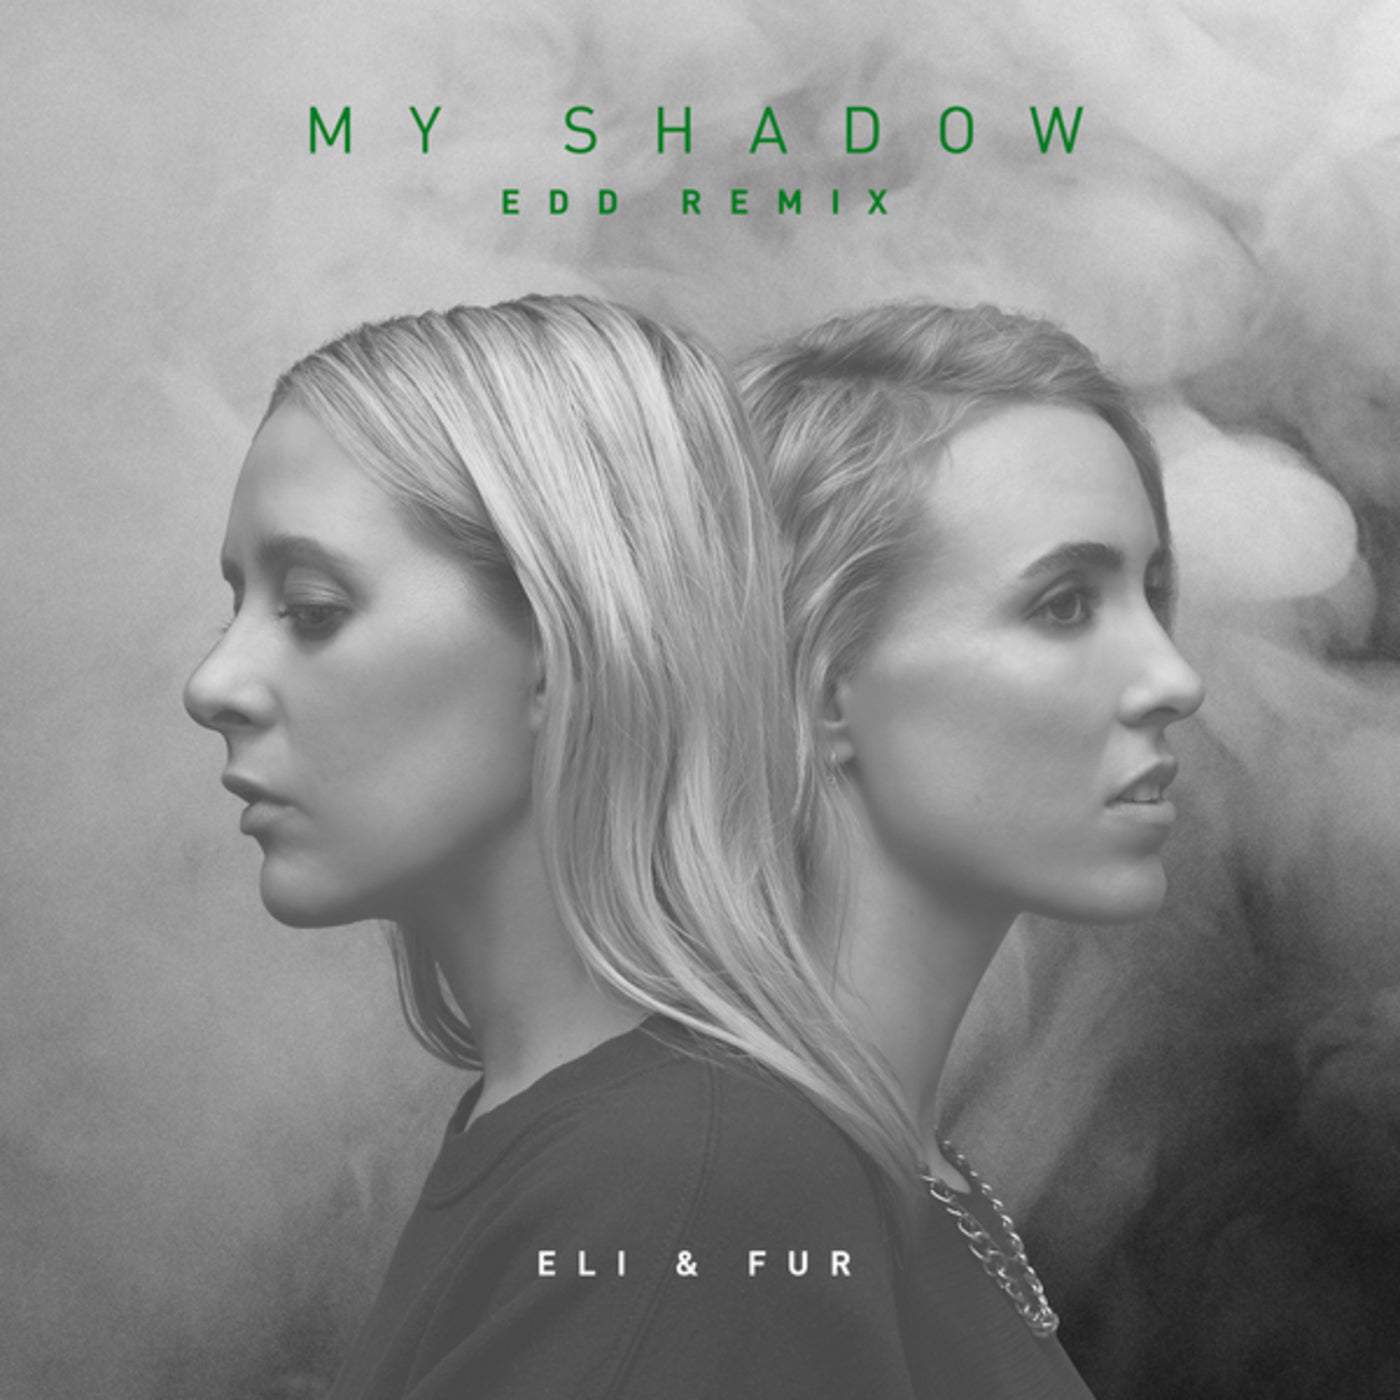 image cover: Eli & Fur - My Shadow (Edd Extended Mix) / 00602445840977